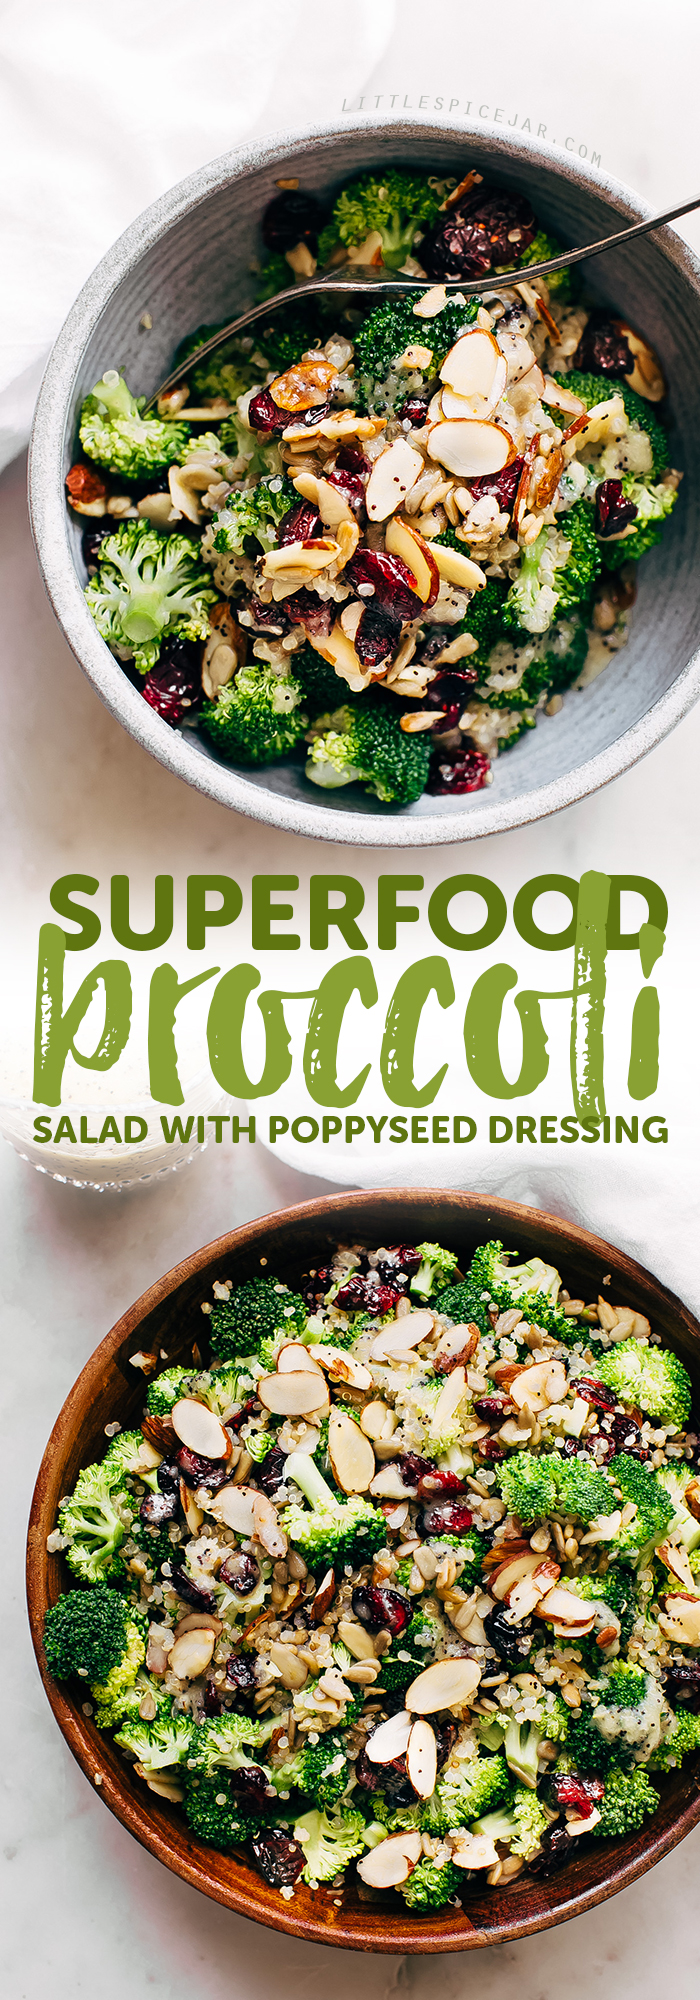 Superfood Broccoli Salad with Poppy Seed Dressing - a simple superfood loaded salad that's filling and nutritious! So good you'll want to make it ALL the time! #broccolisalad #superfoodsalad #salad #powersalad | Littlespicejar.com